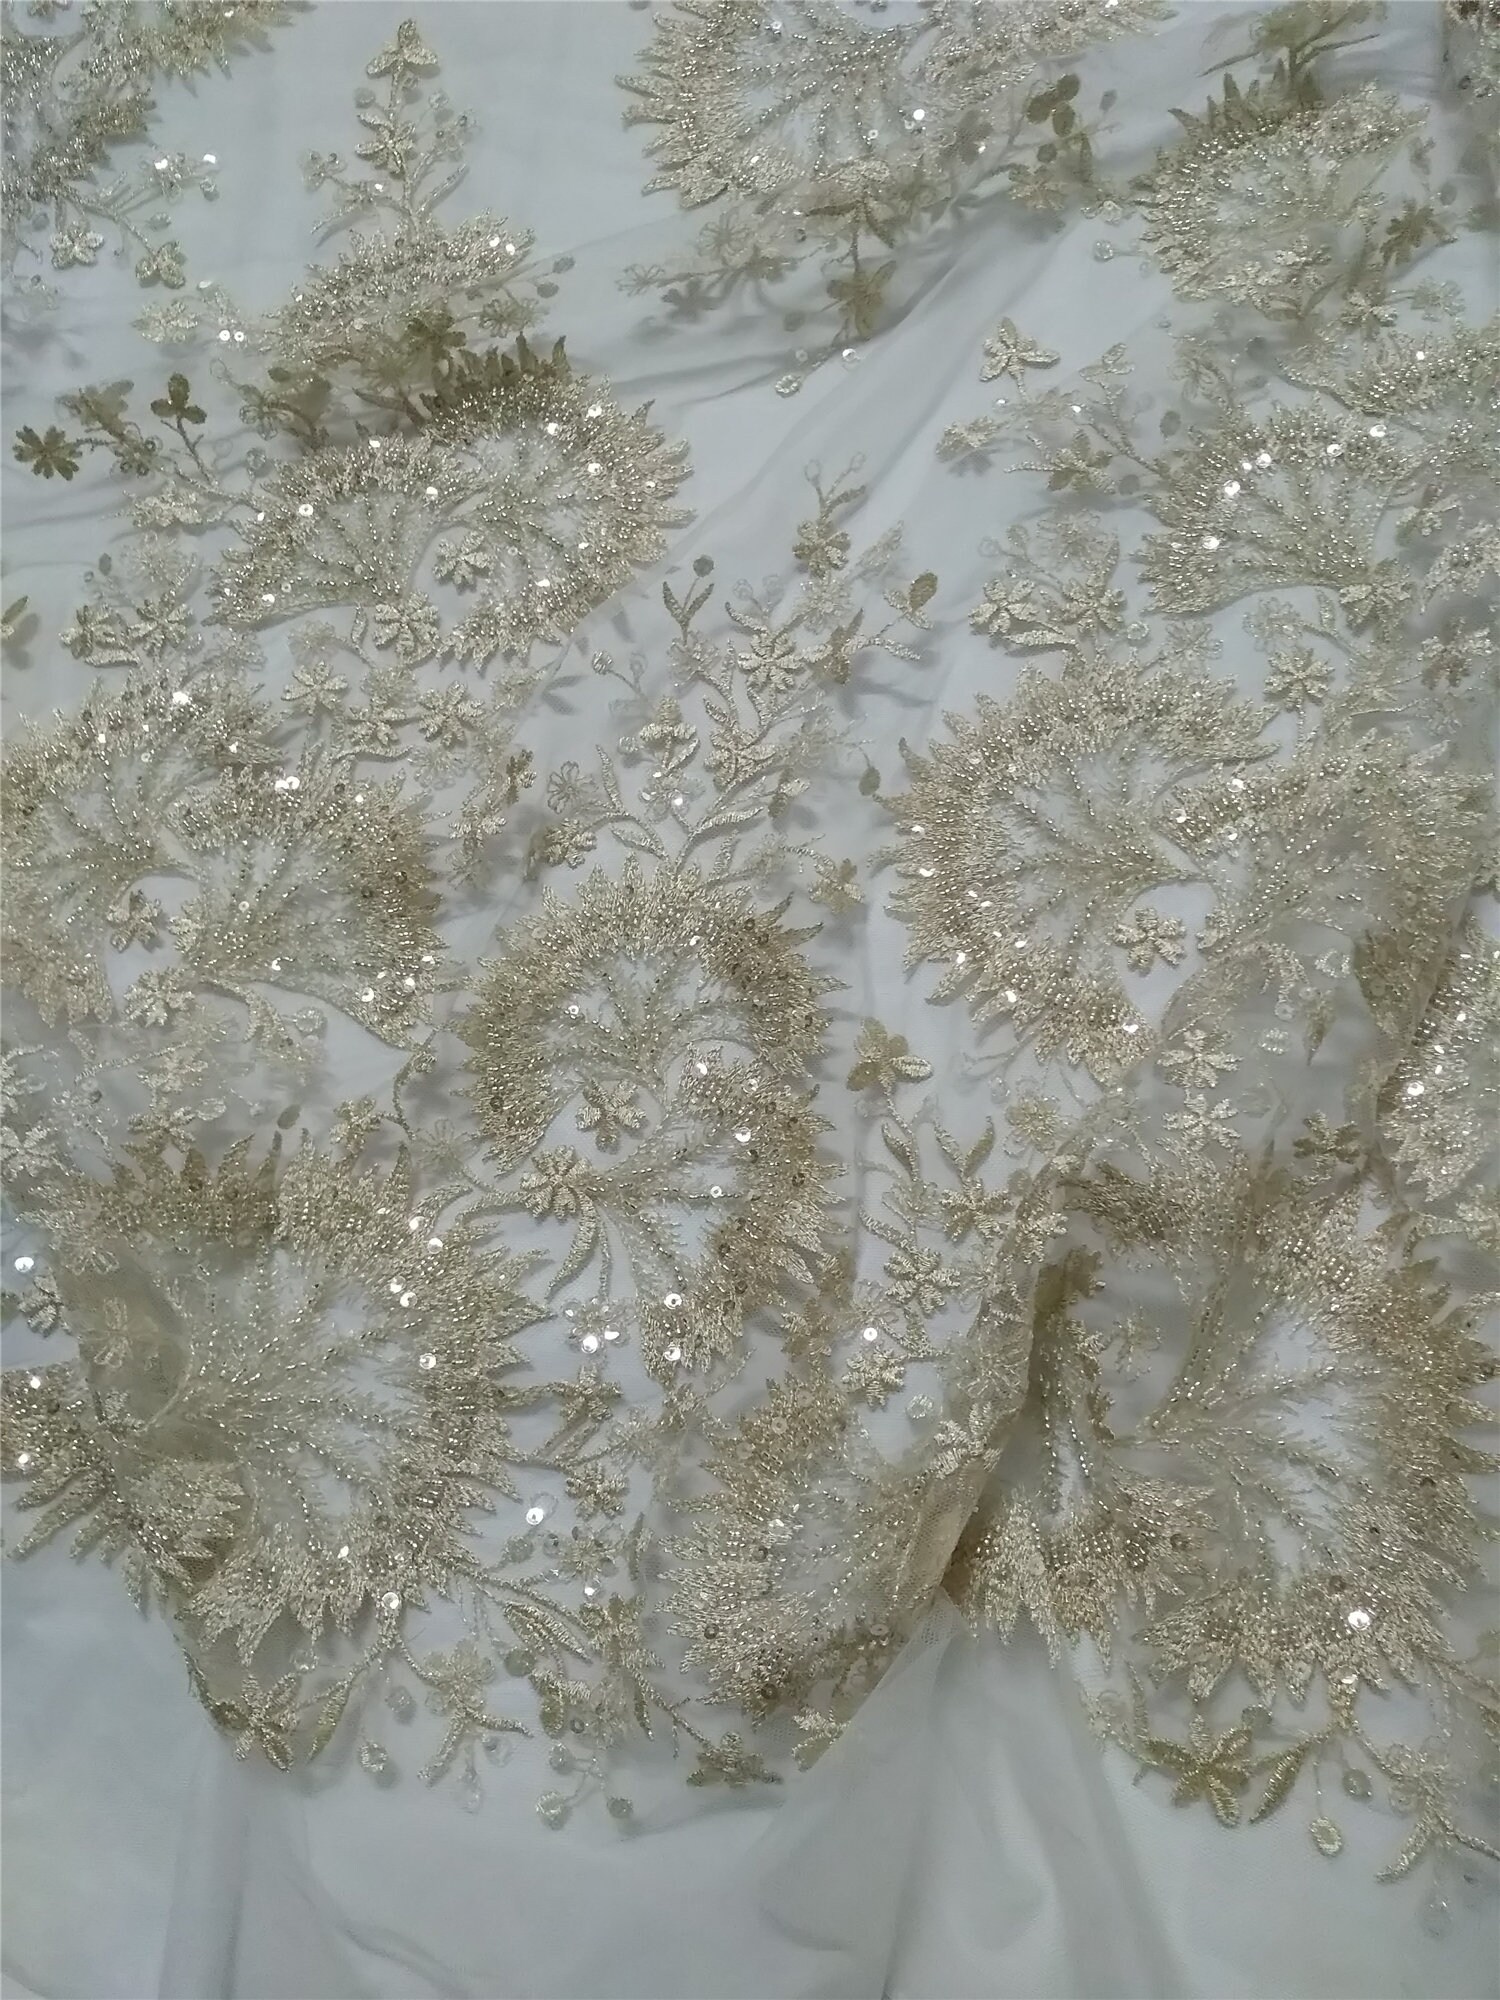 NEW Luxurious beading lace fabric with sequins elegent | Etsy